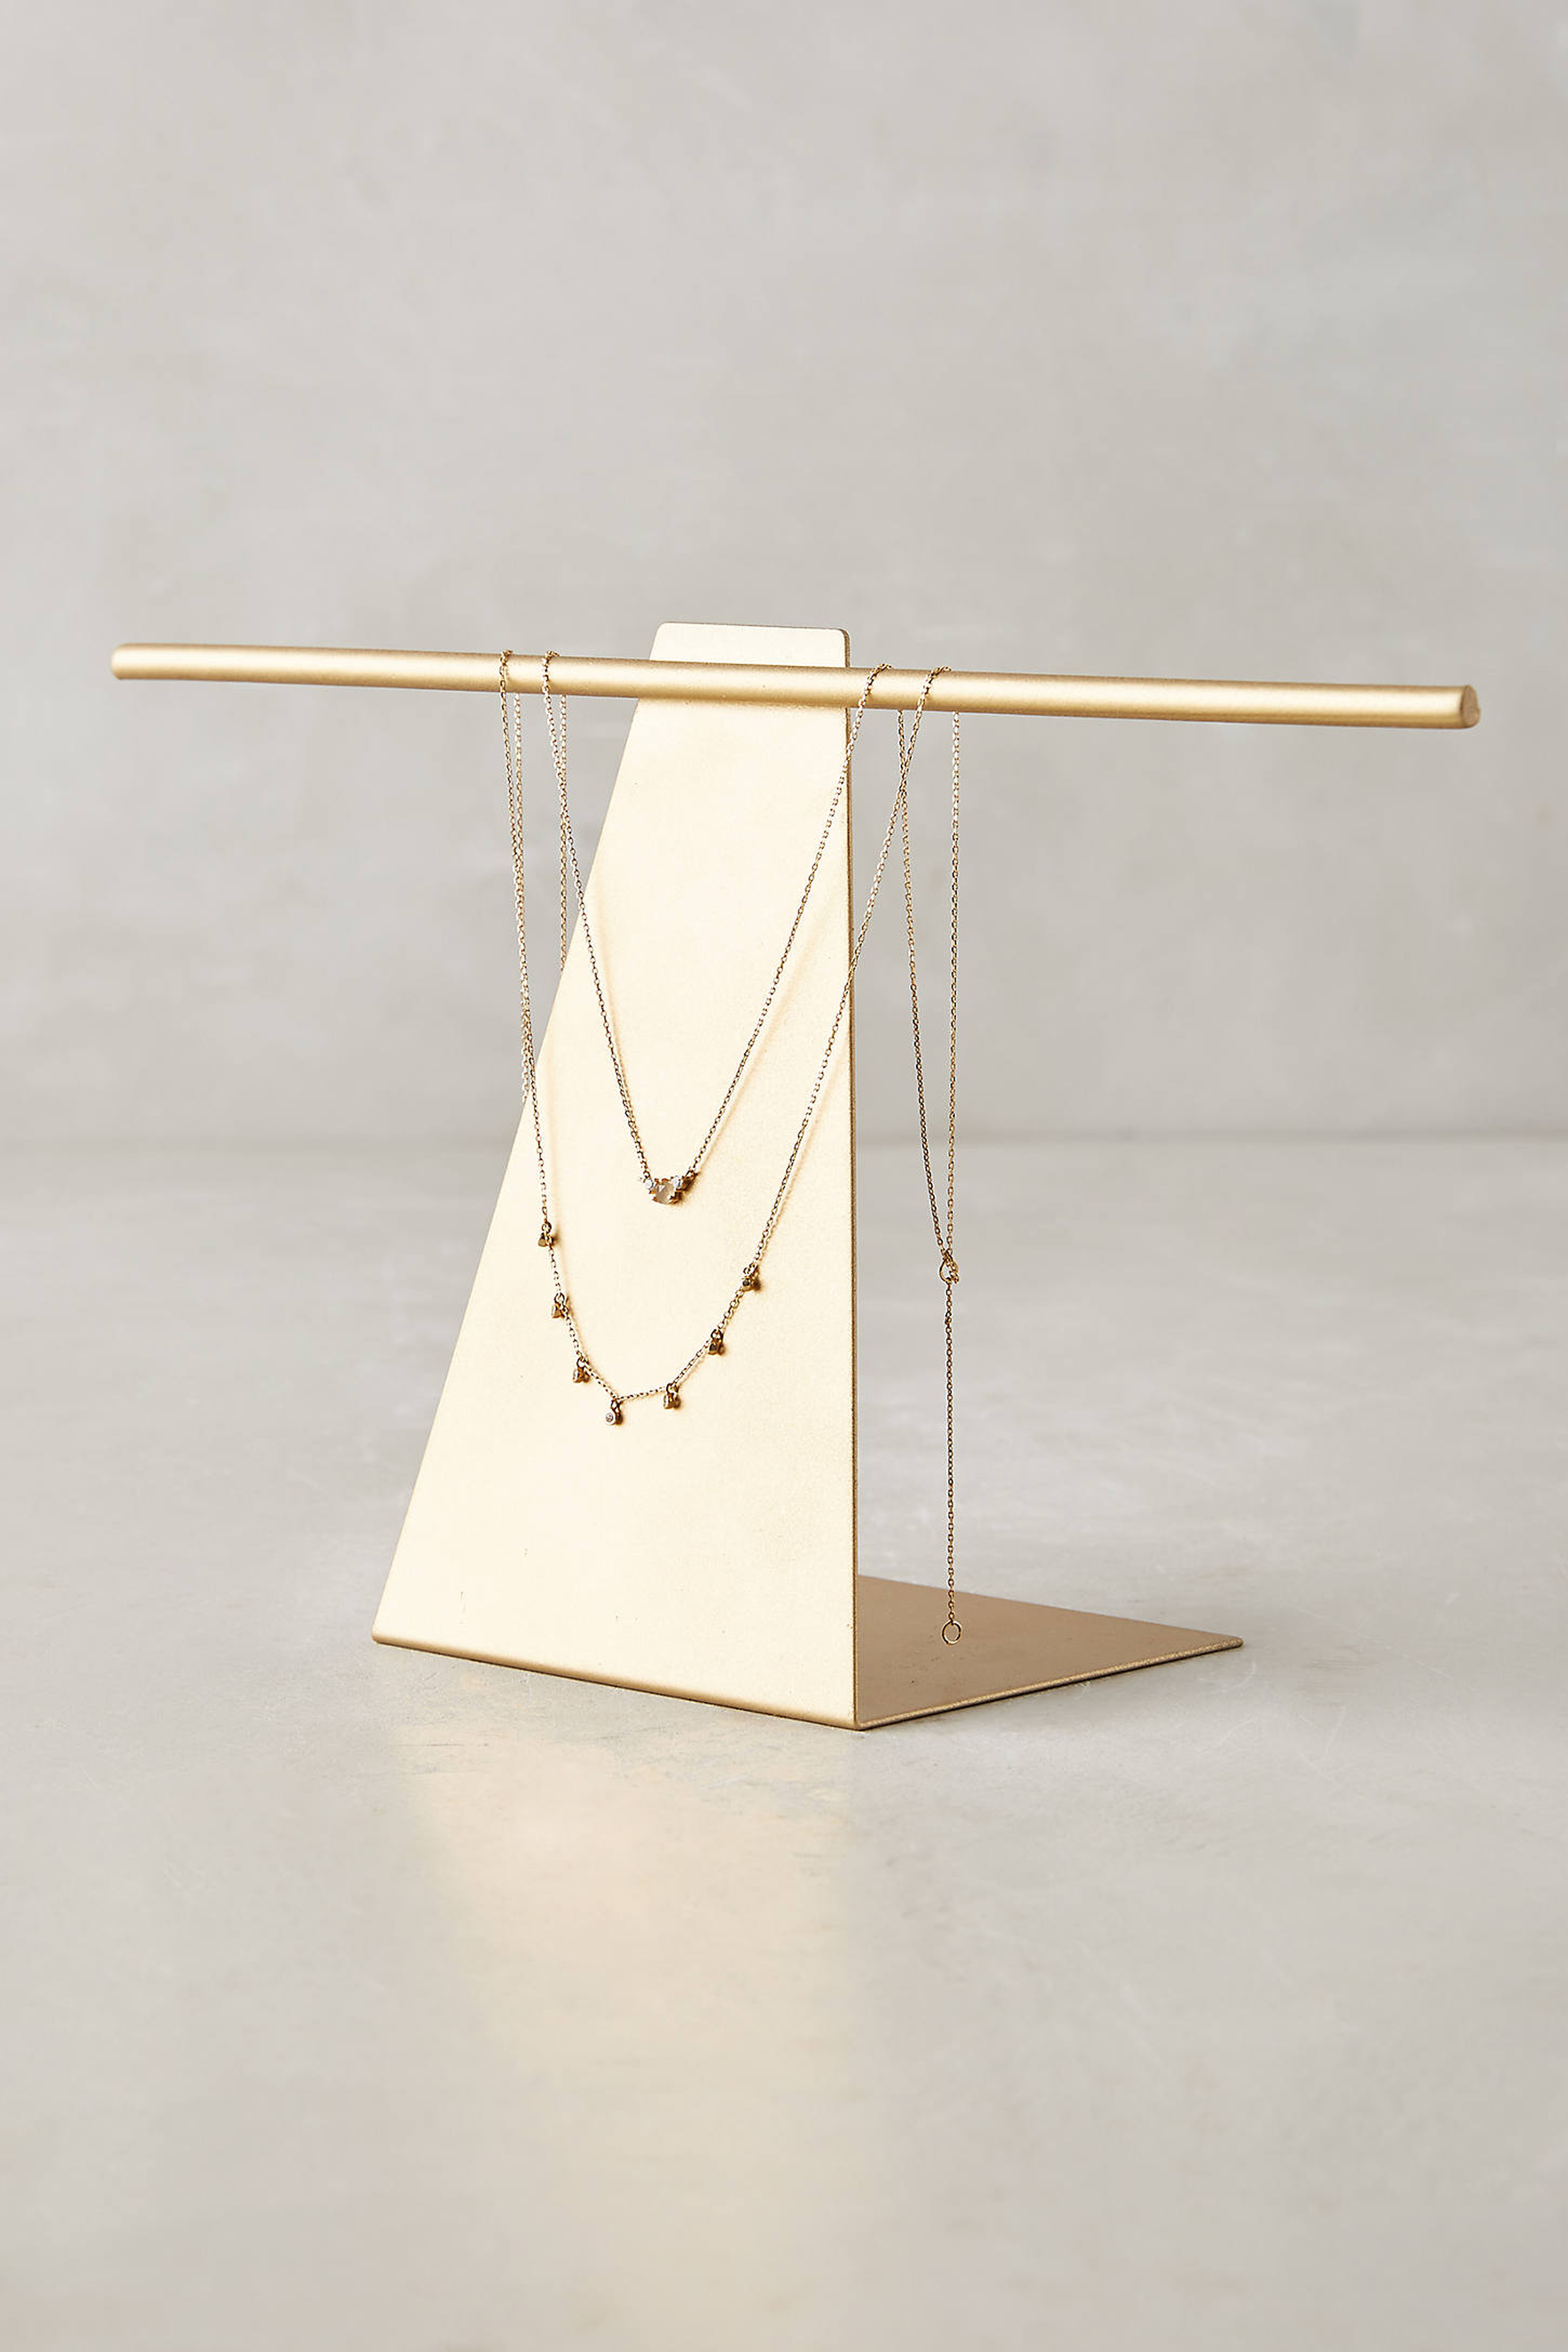 Metronome Jewelry Stand - Anthropologie